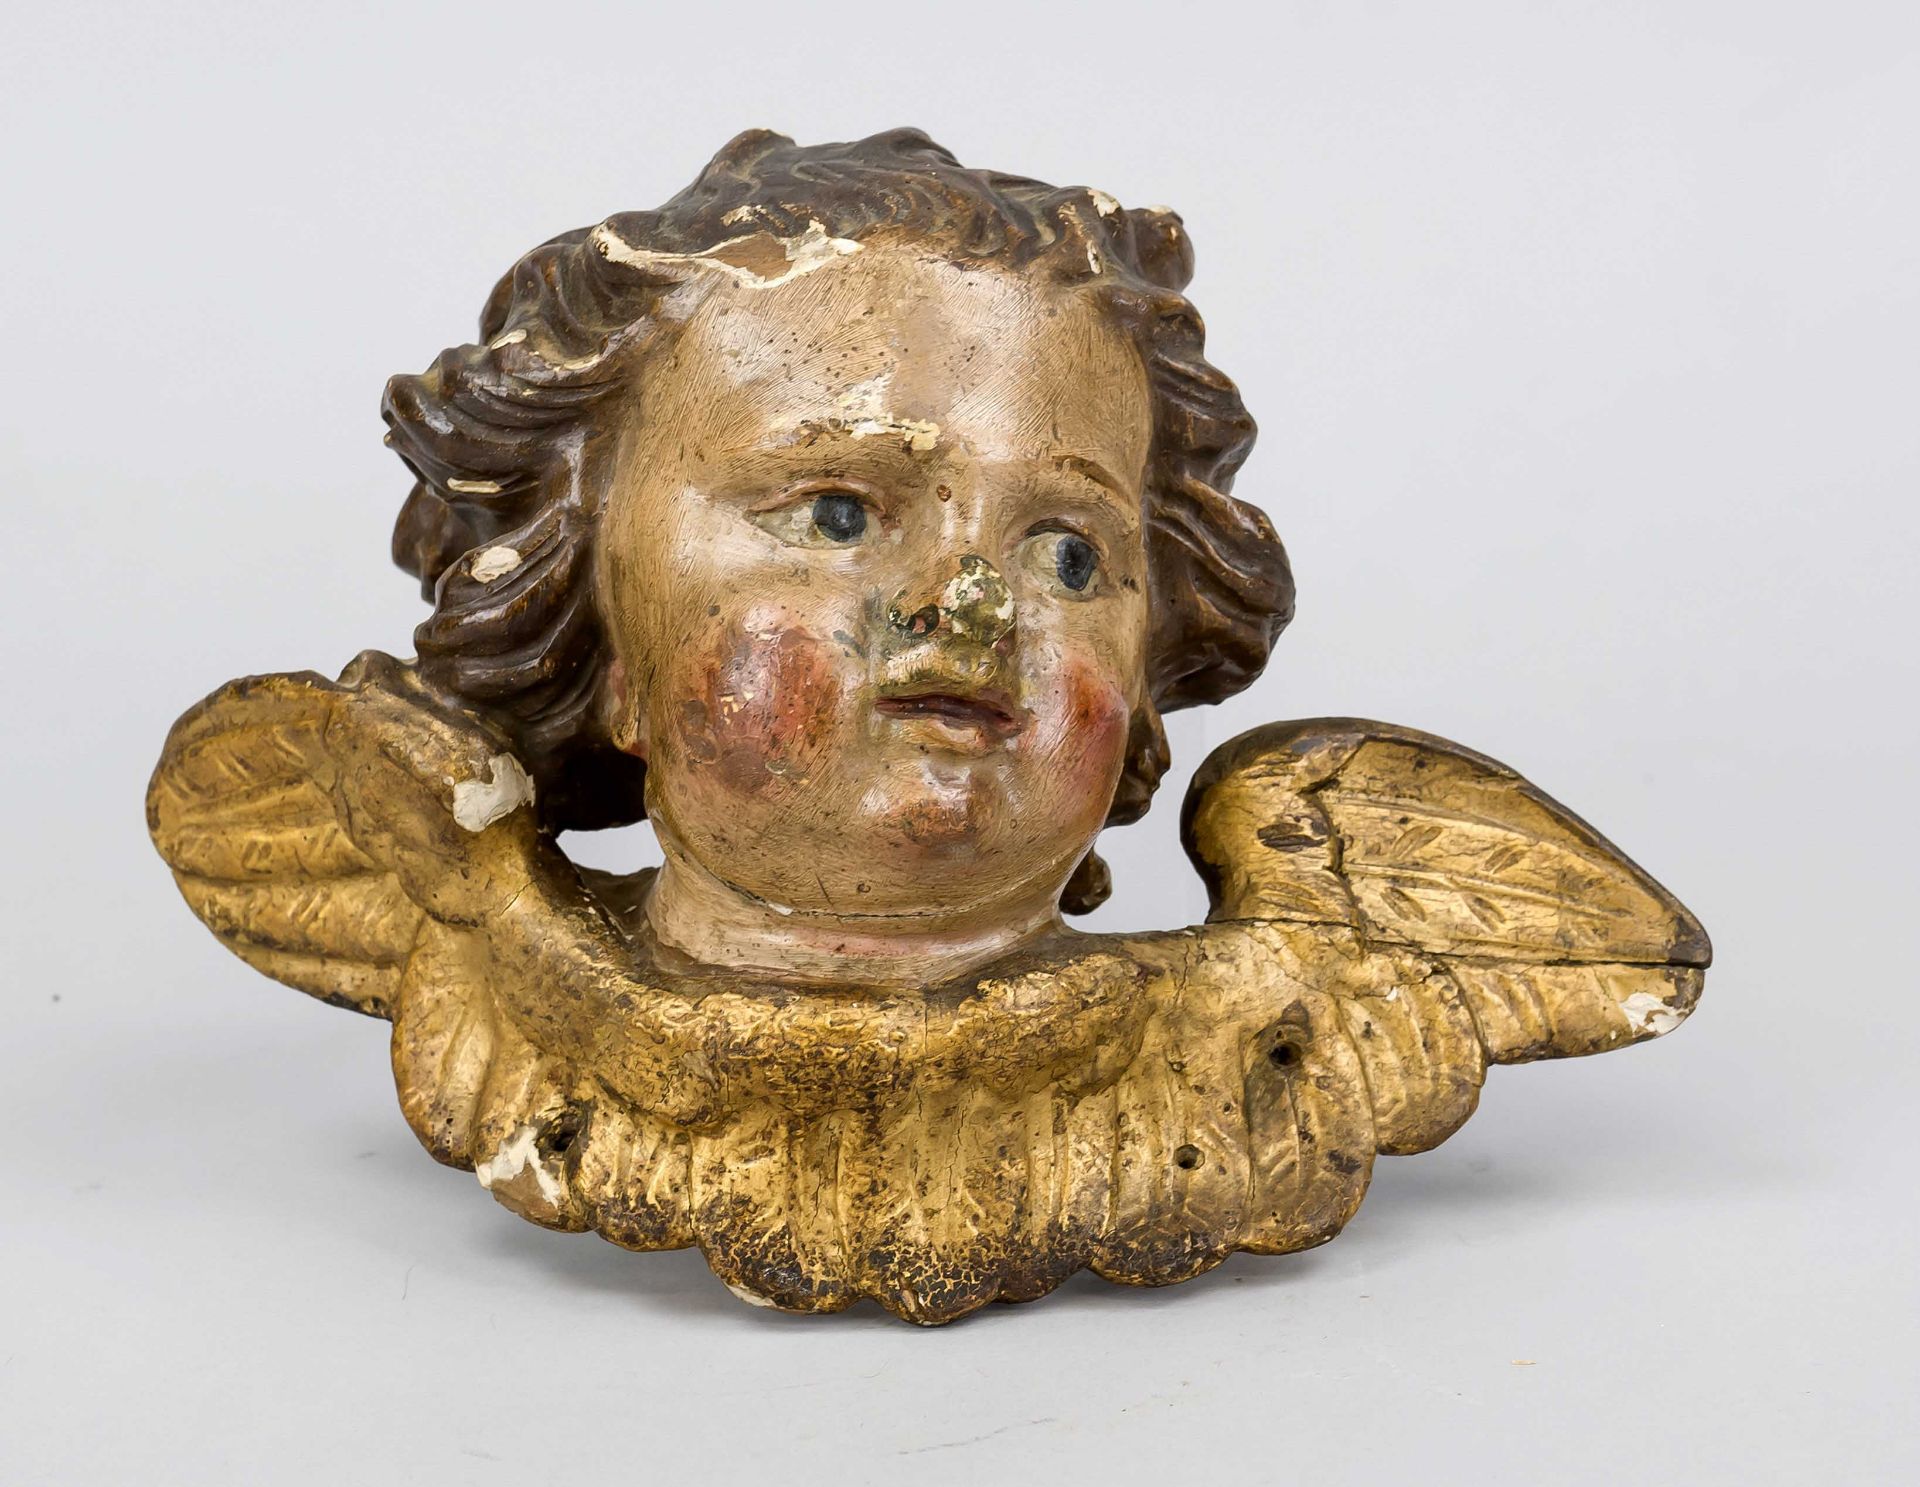 Angel's head or putti head, 19th century, carved wood and painted, gilded wing wreath, suspension on